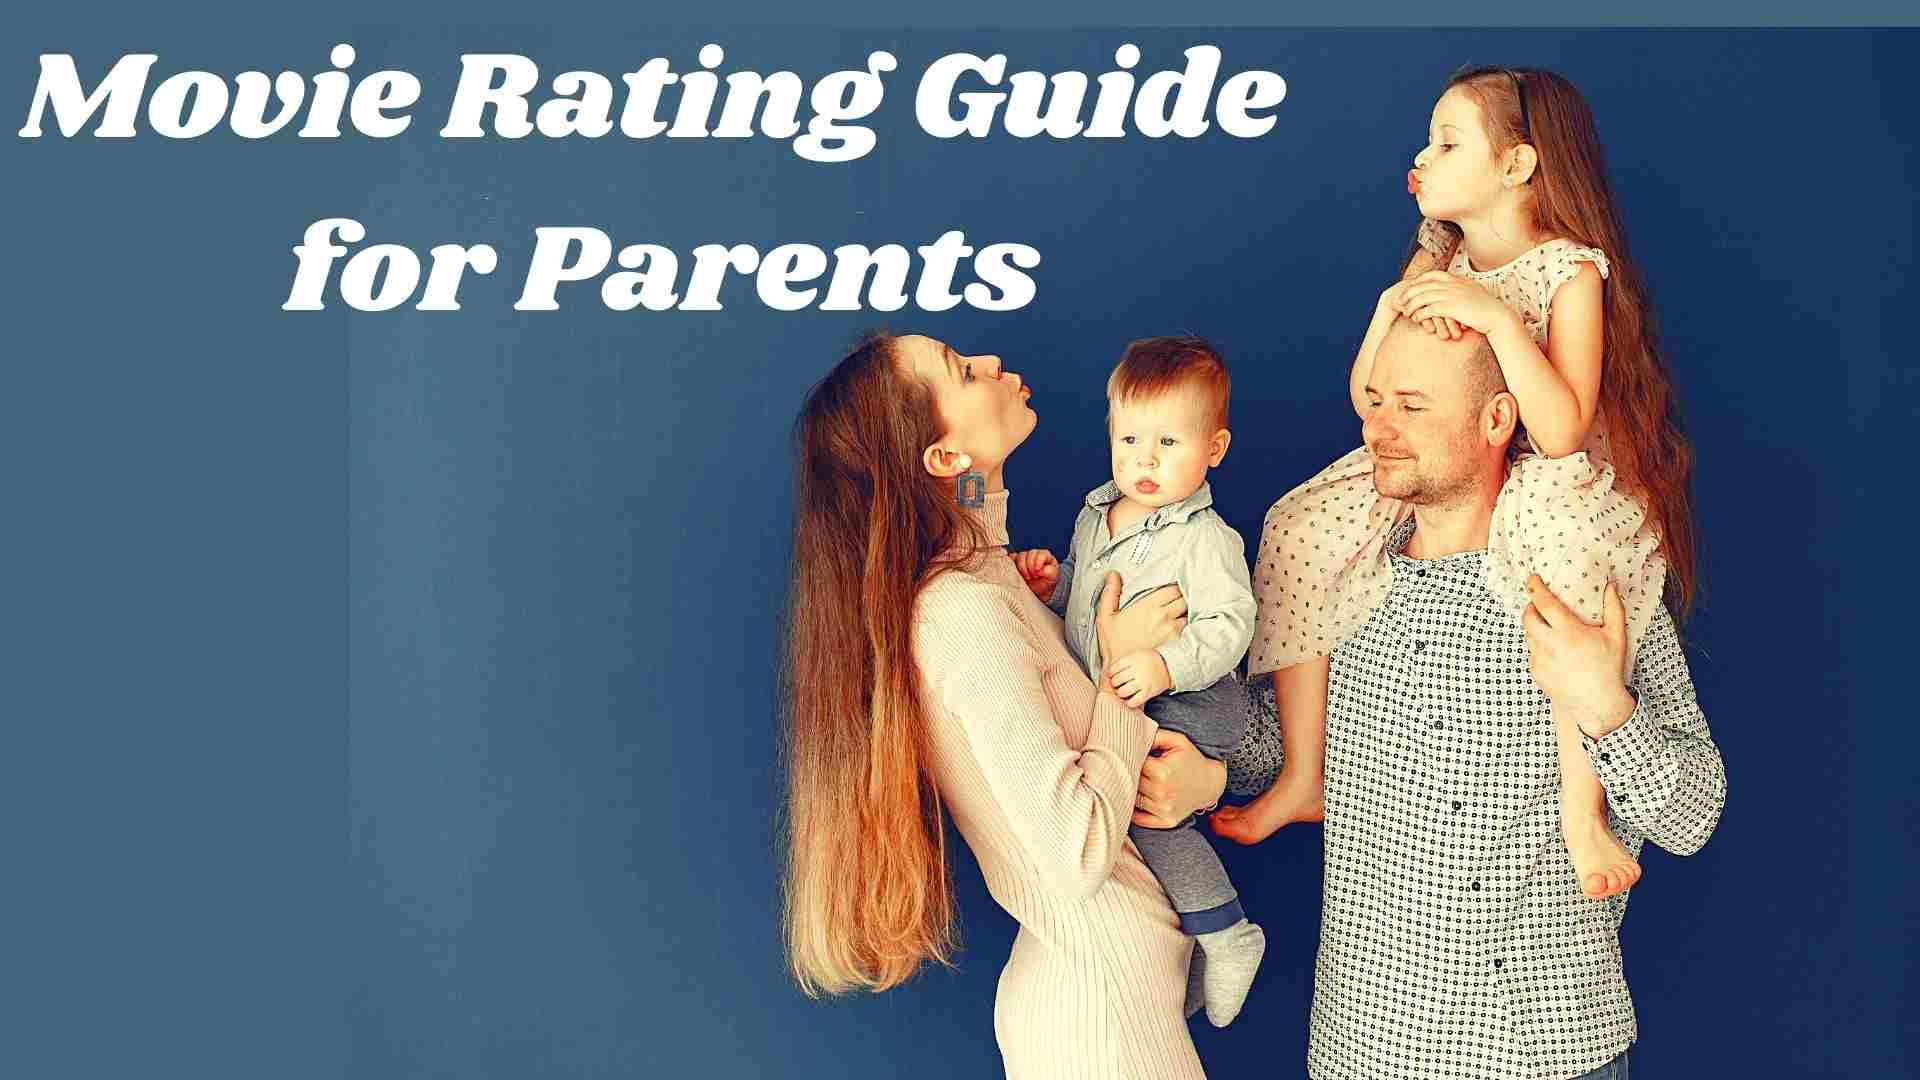 Movie Rating Guide for Parents wallpaper and images